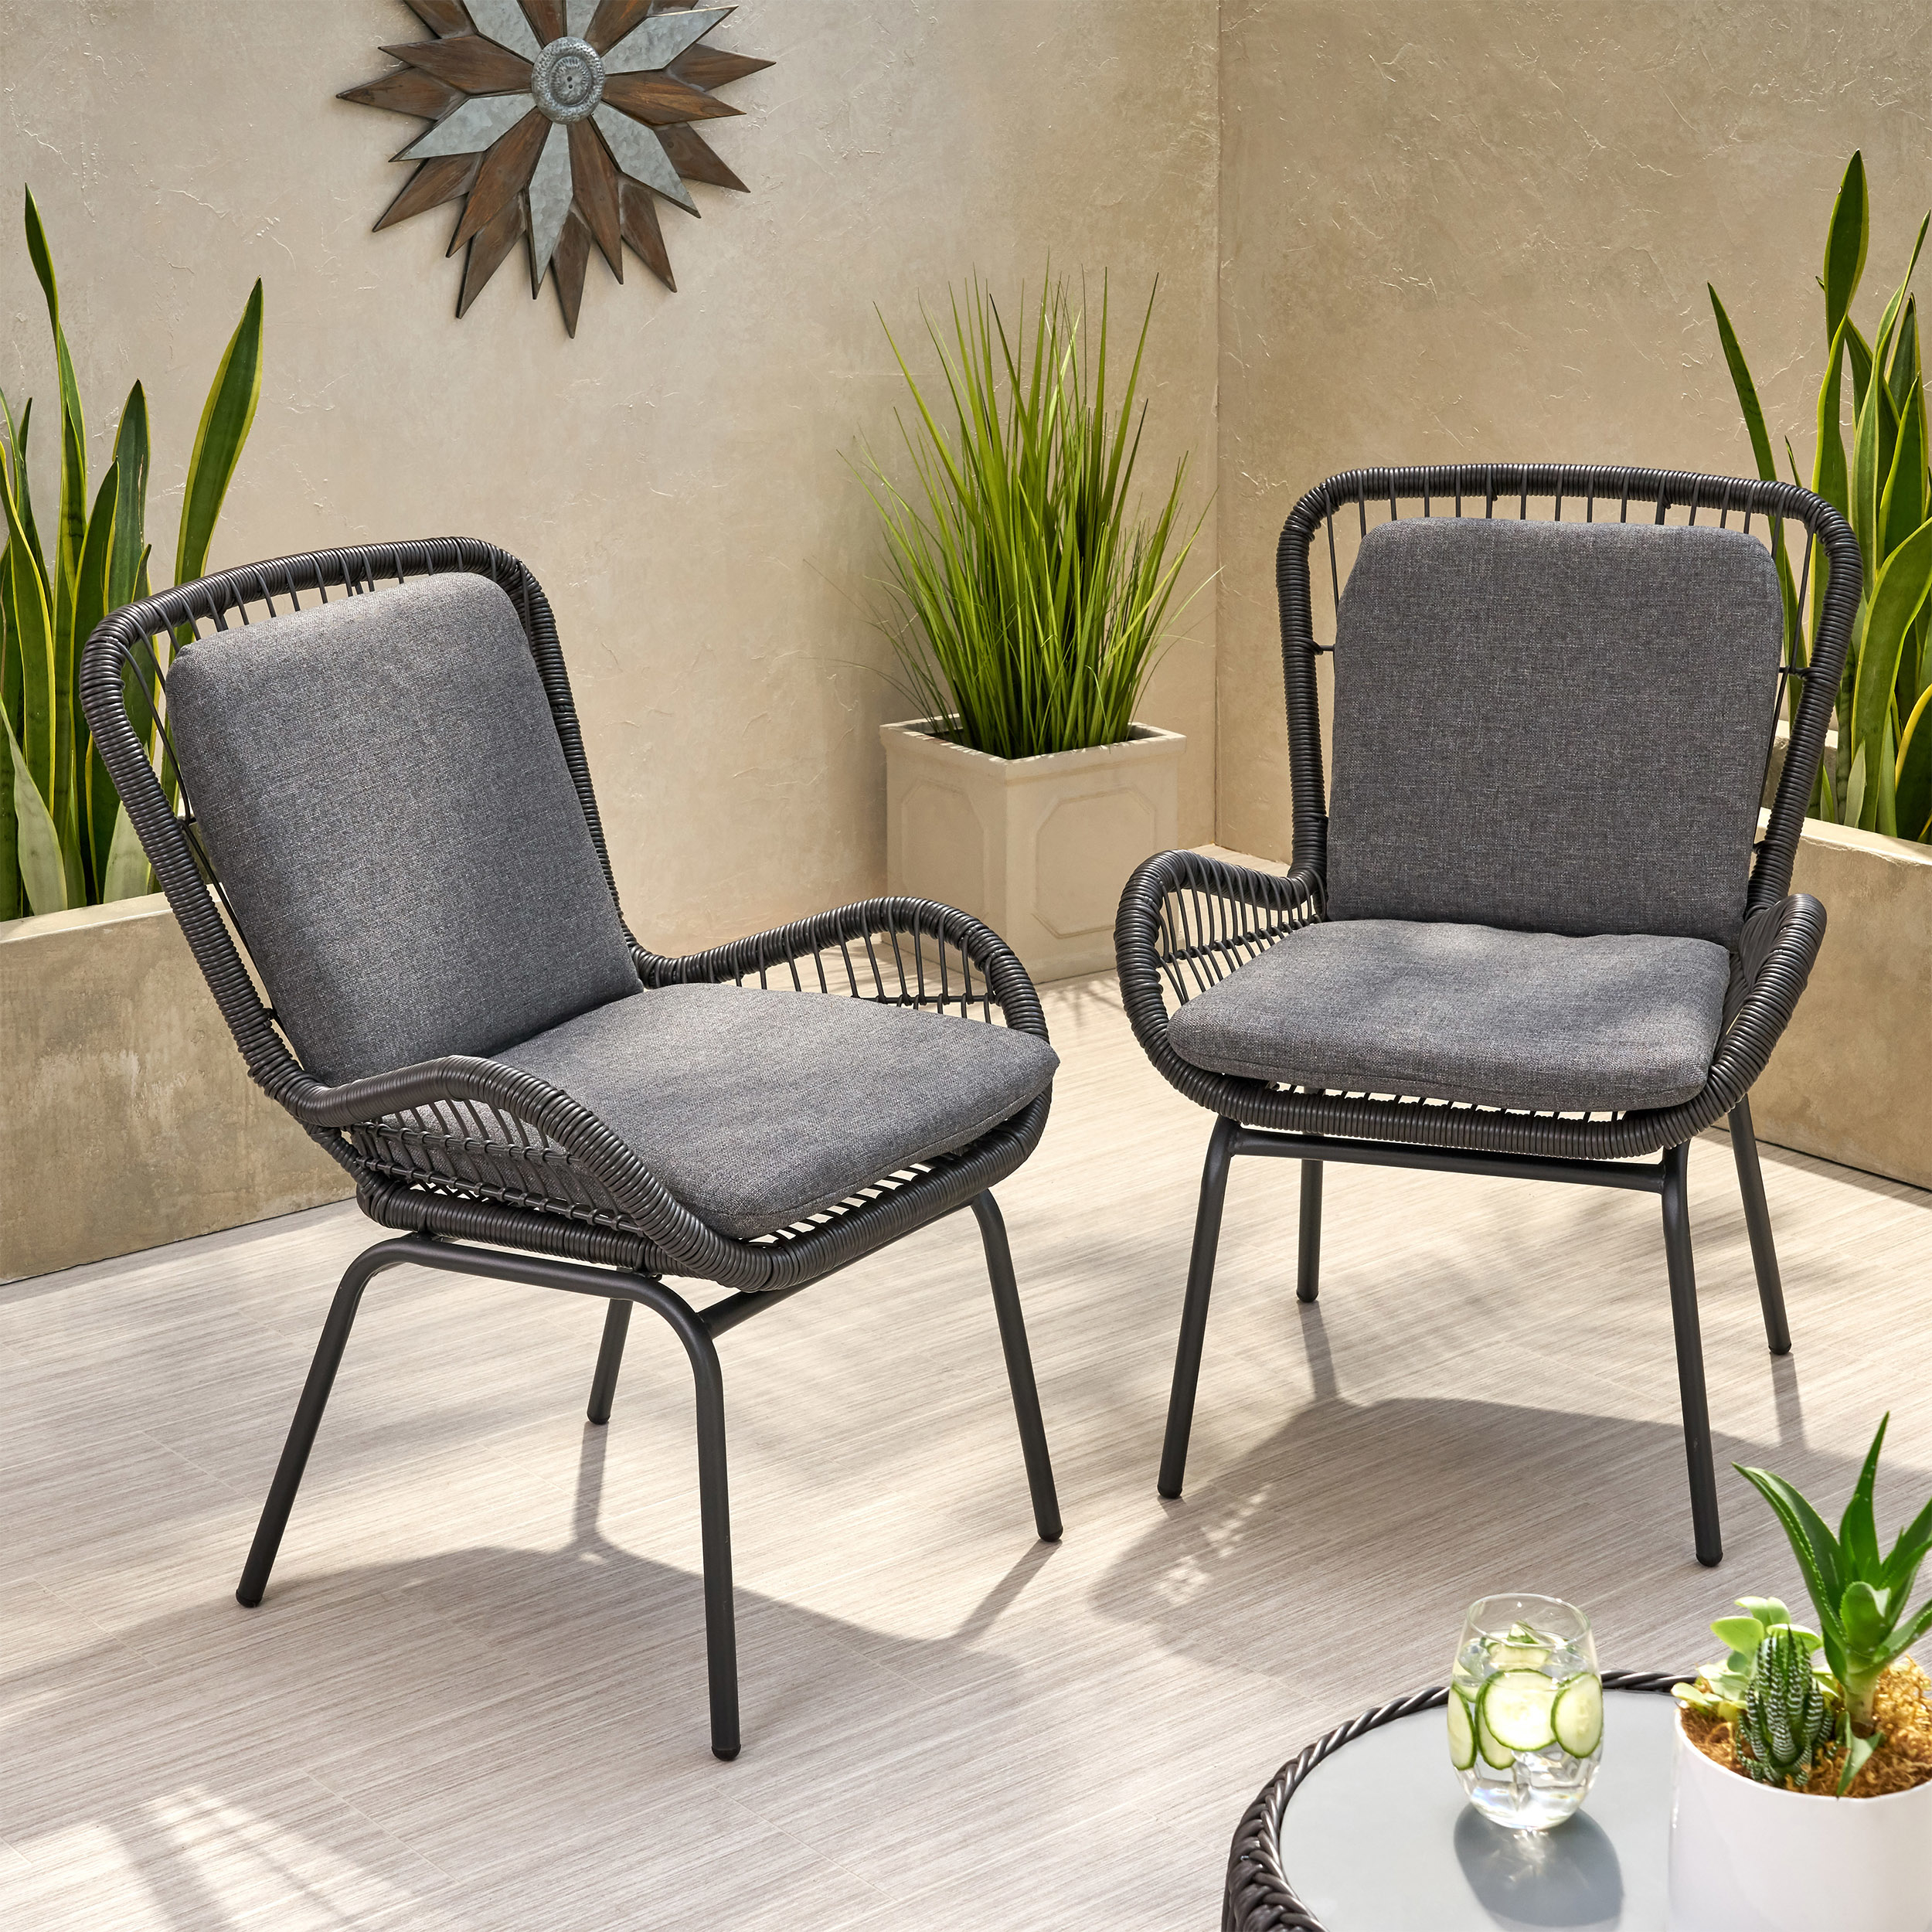 Alice Outdoor Wicker Club Chair With Cushions (Set Of 2) - Light Brown + Beige